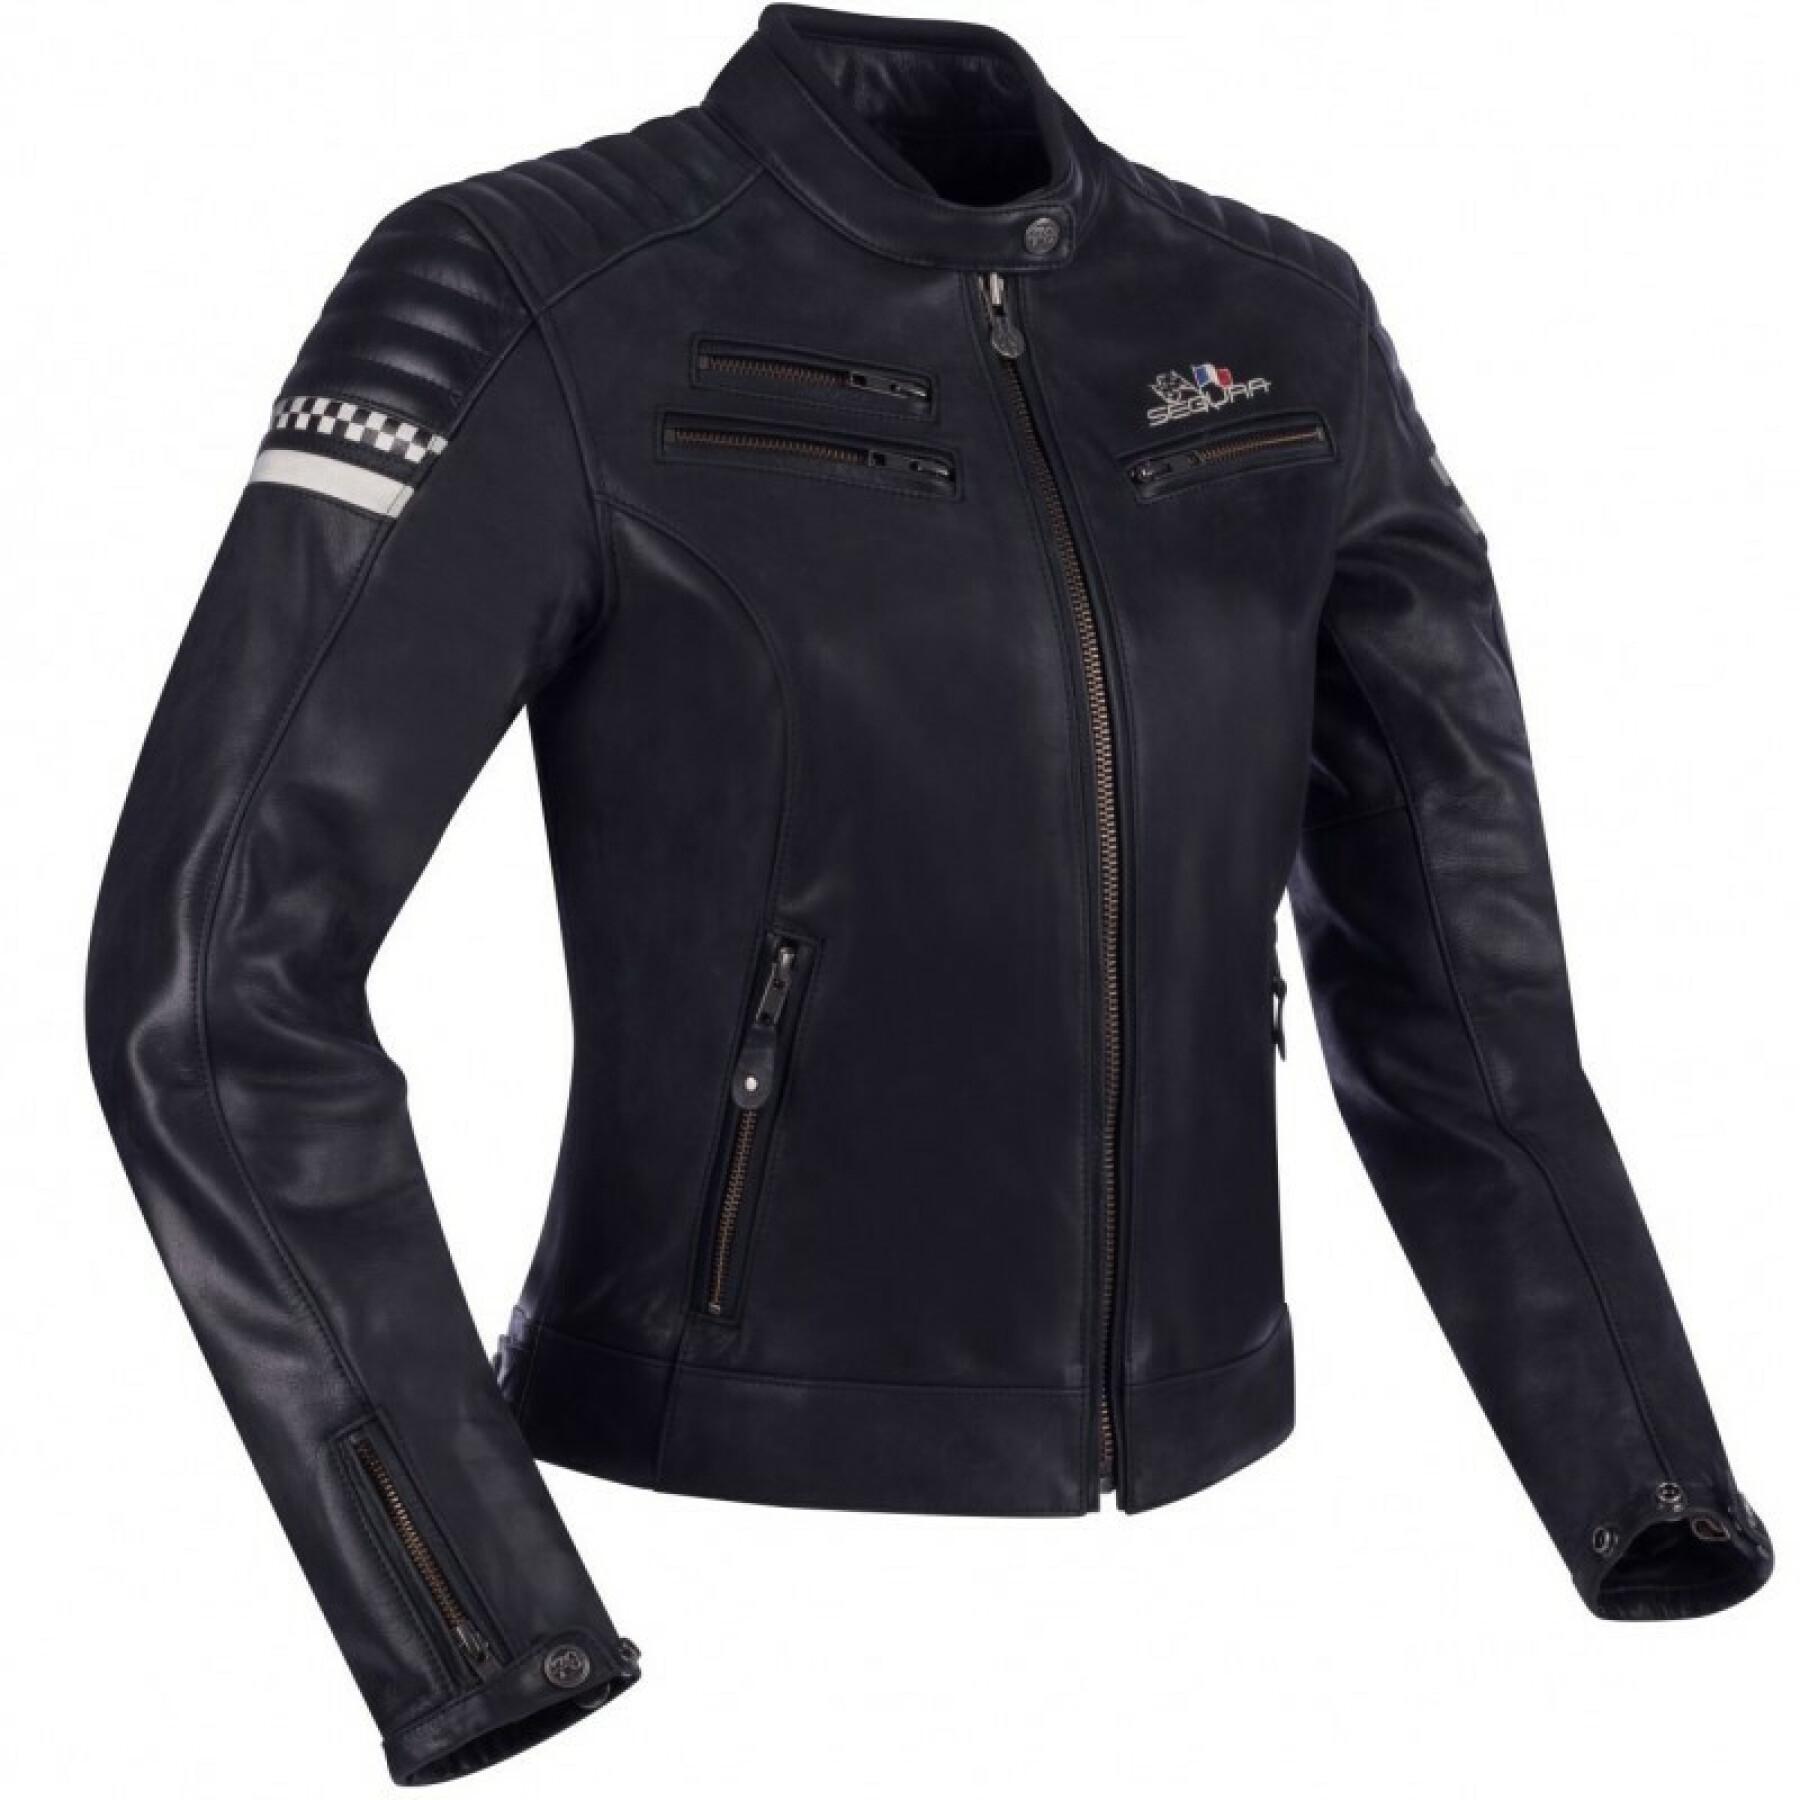 Limited edition jacket for women Segura speed funky